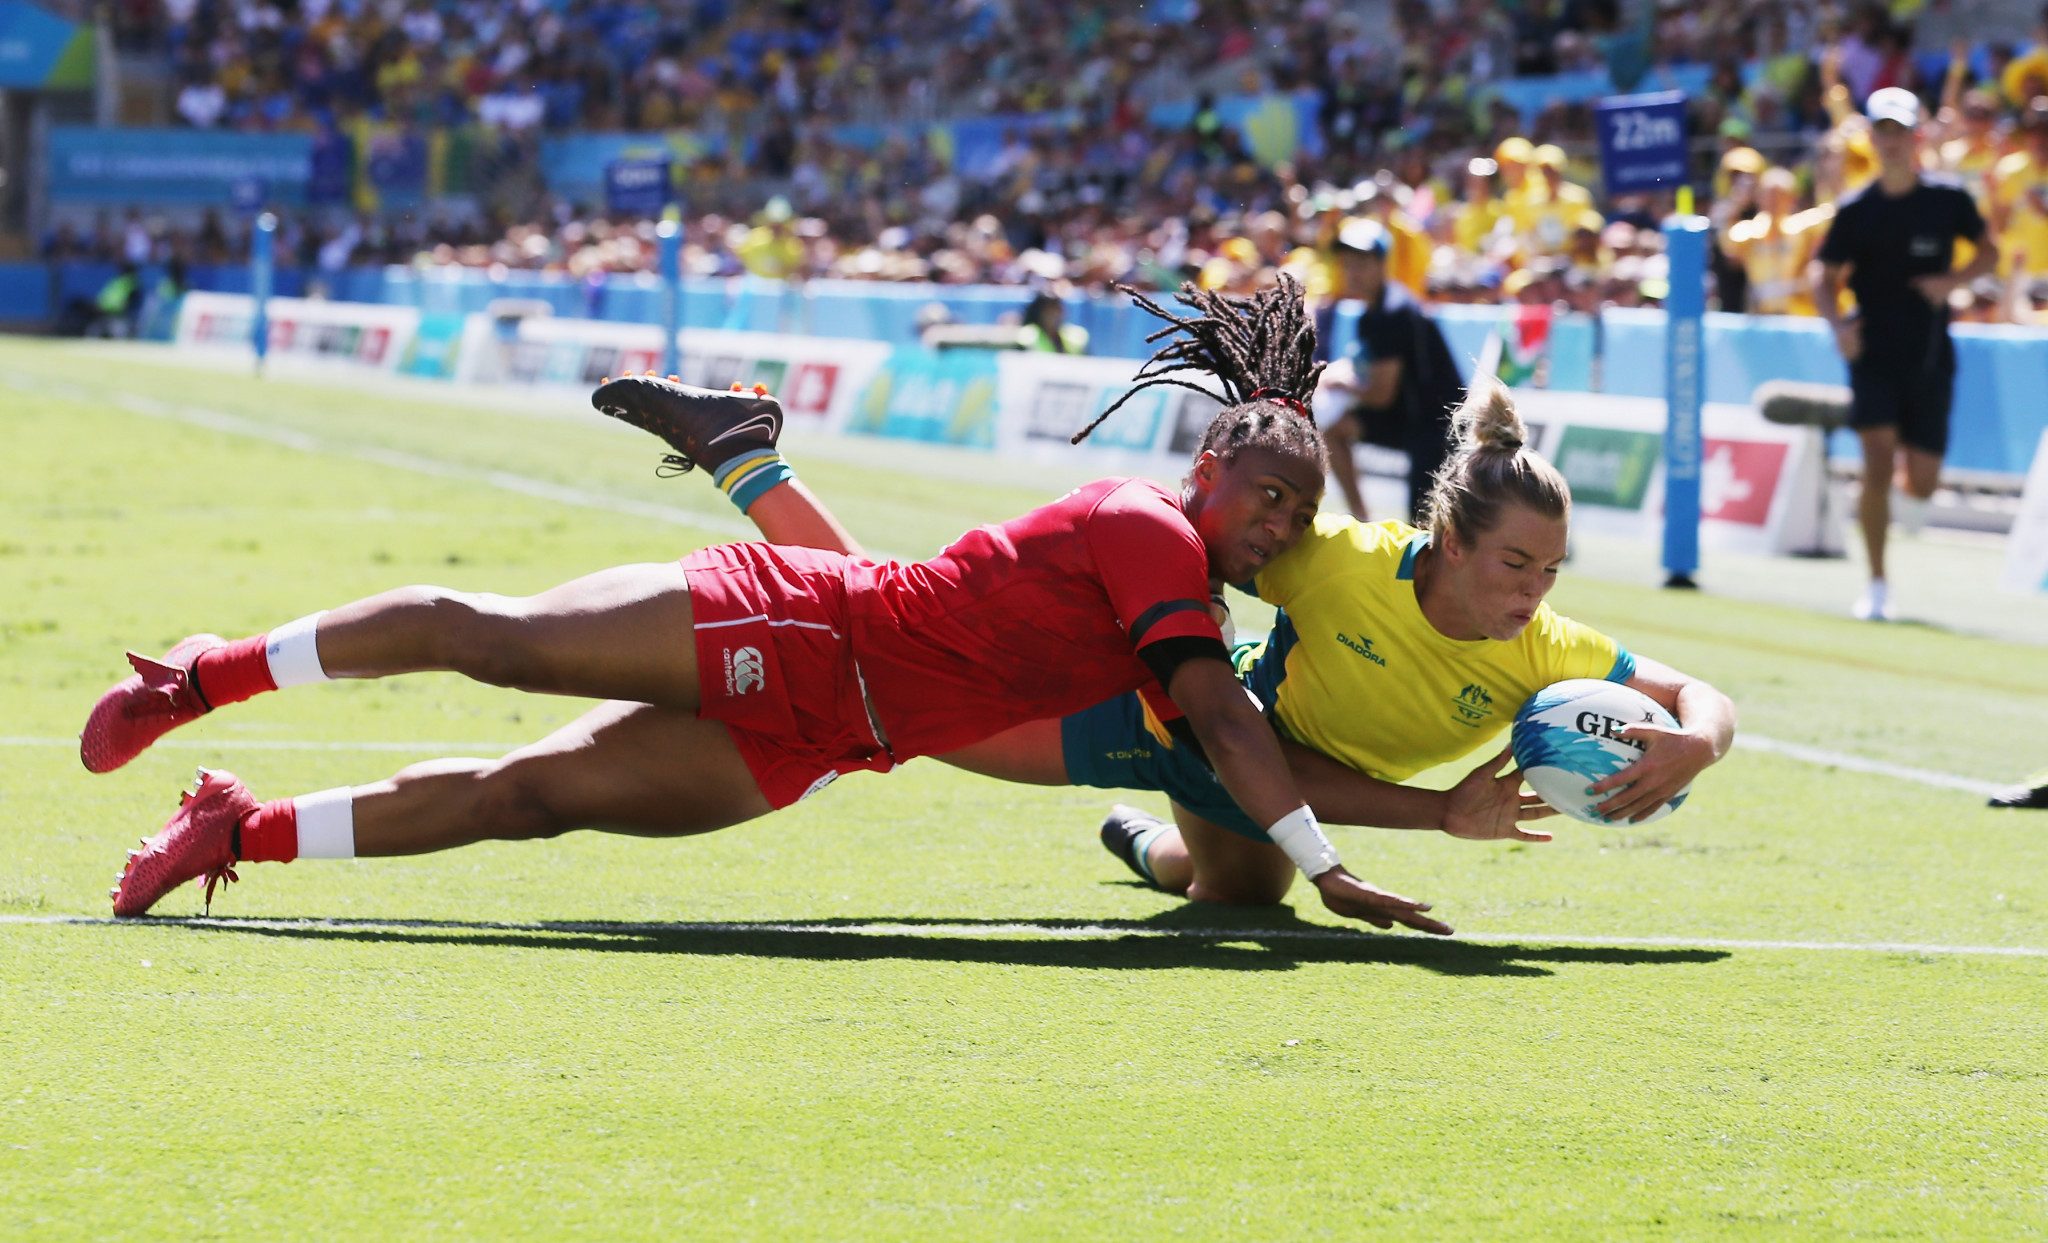 Rugby sevens took place on the concluding weekend  ©Getty Images